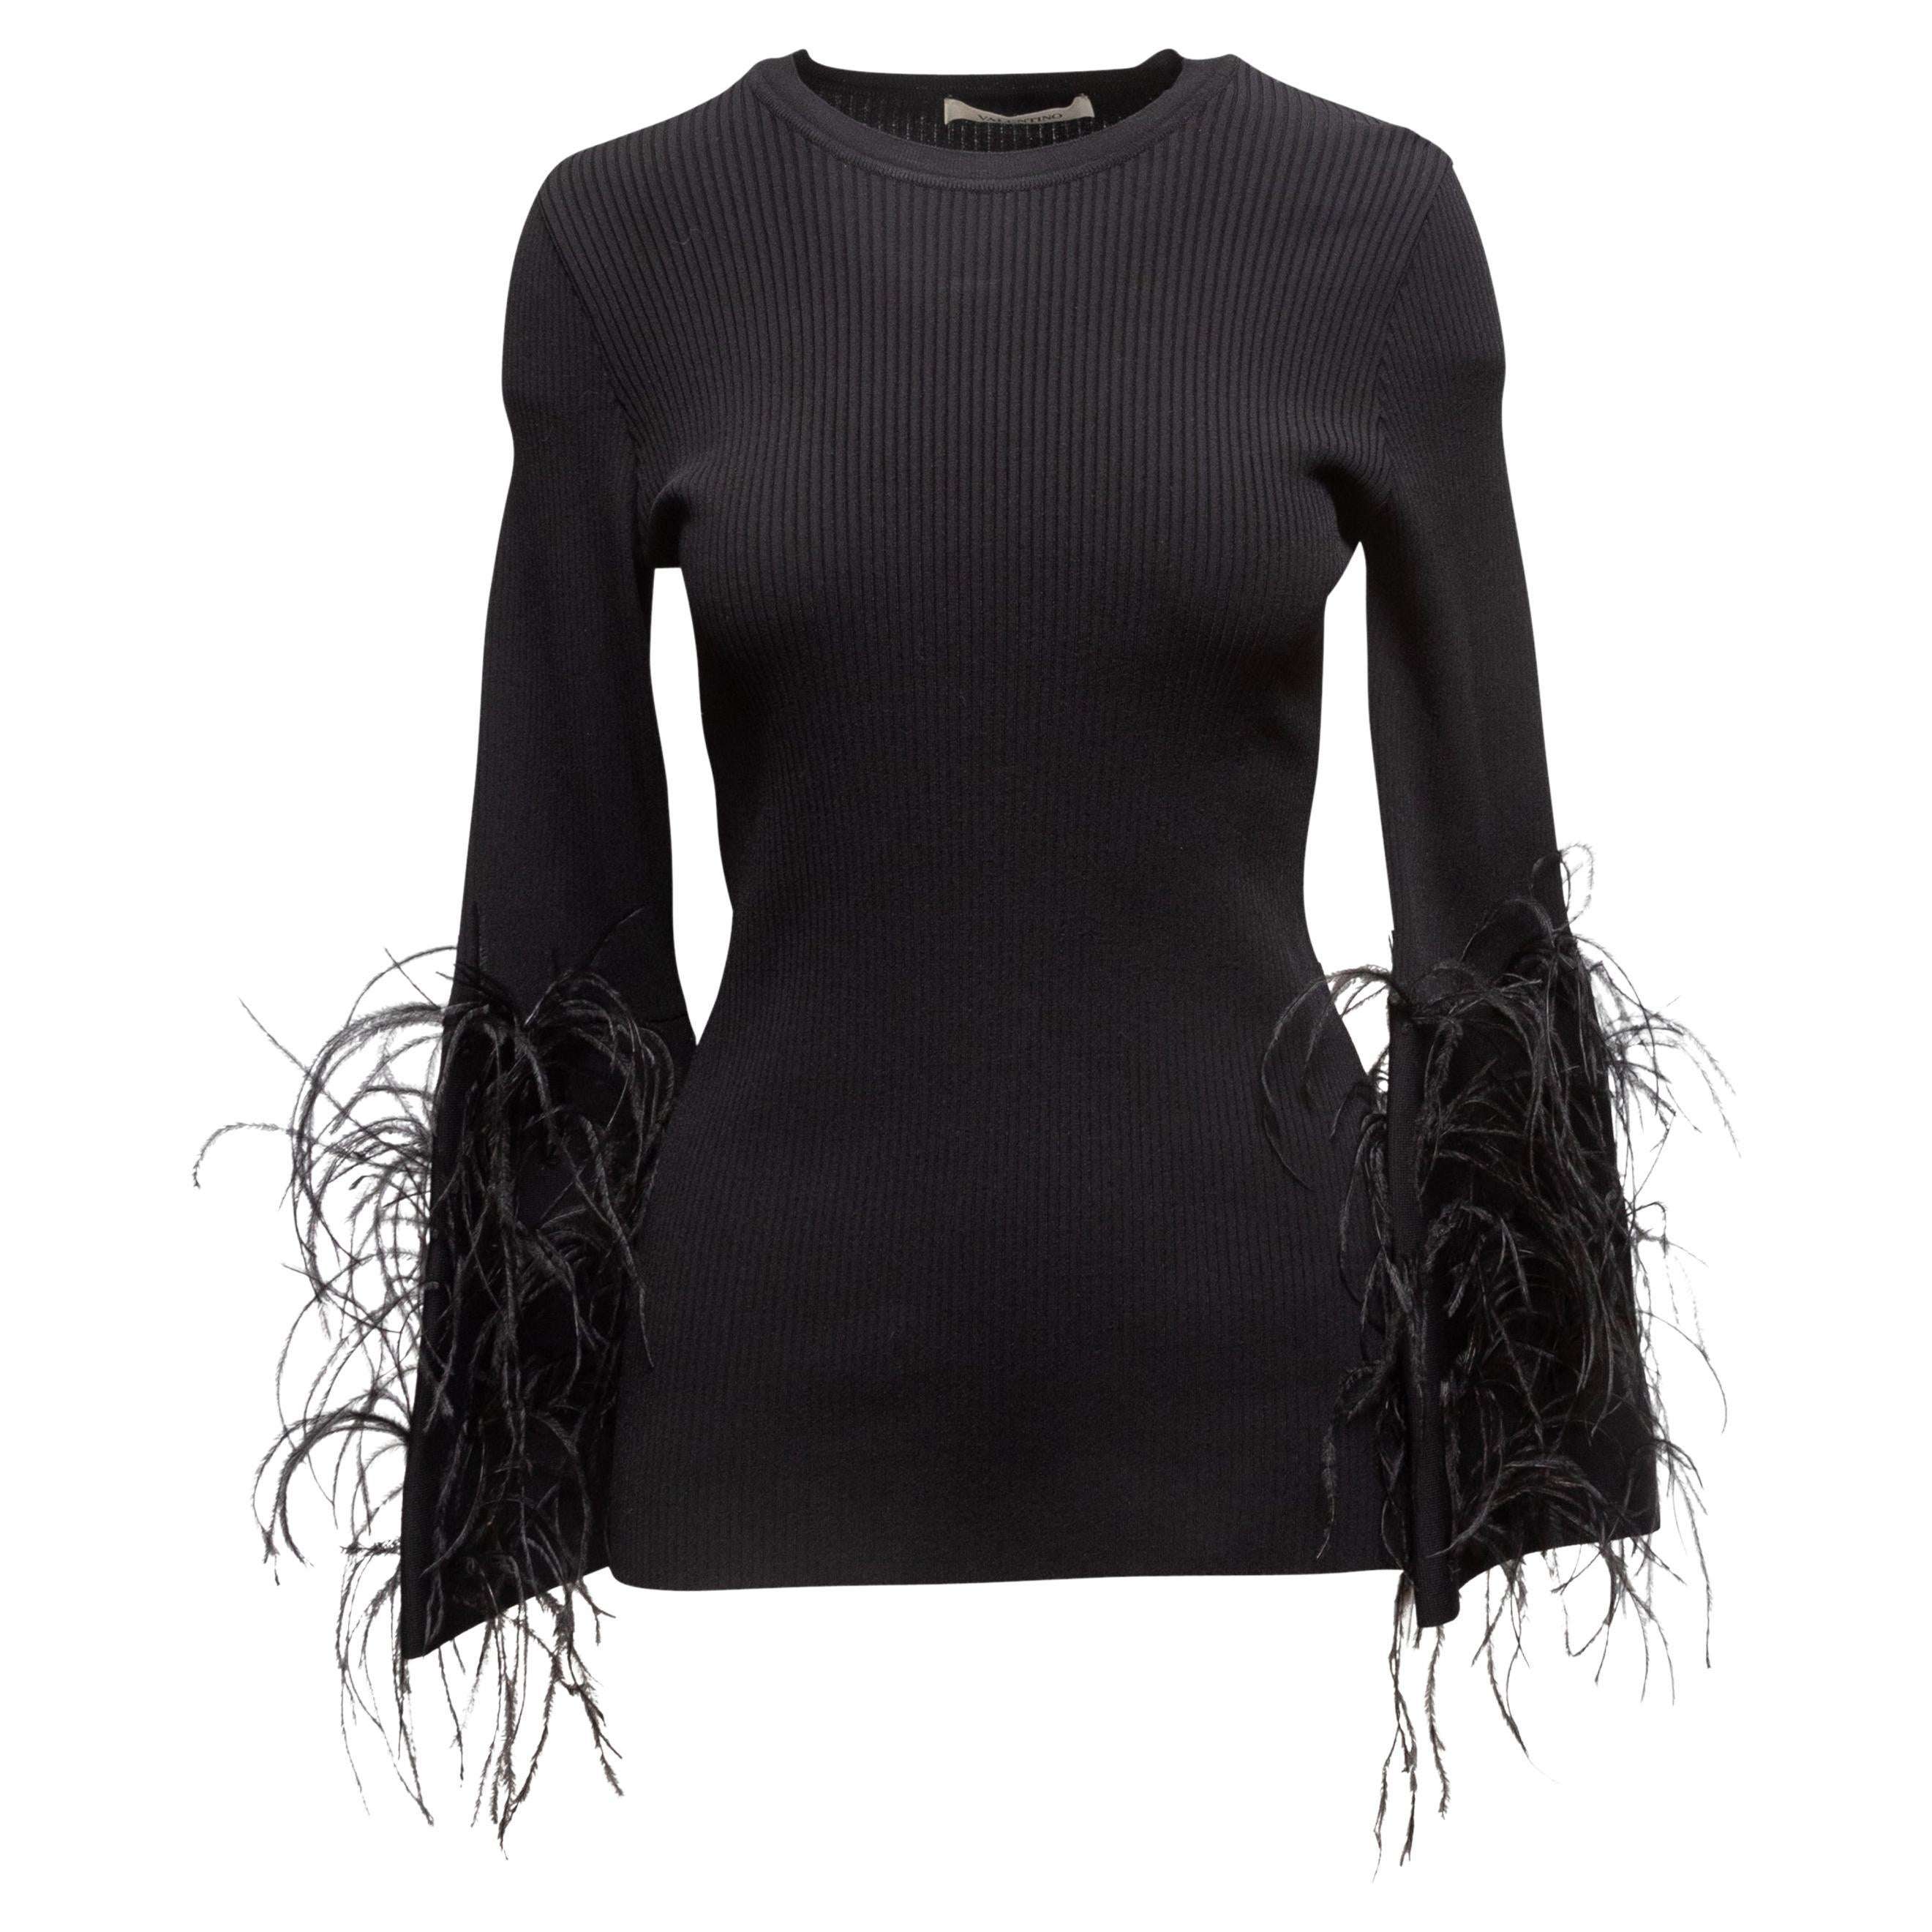 Valentino Black Rib Knit Feather-Trimmed Top